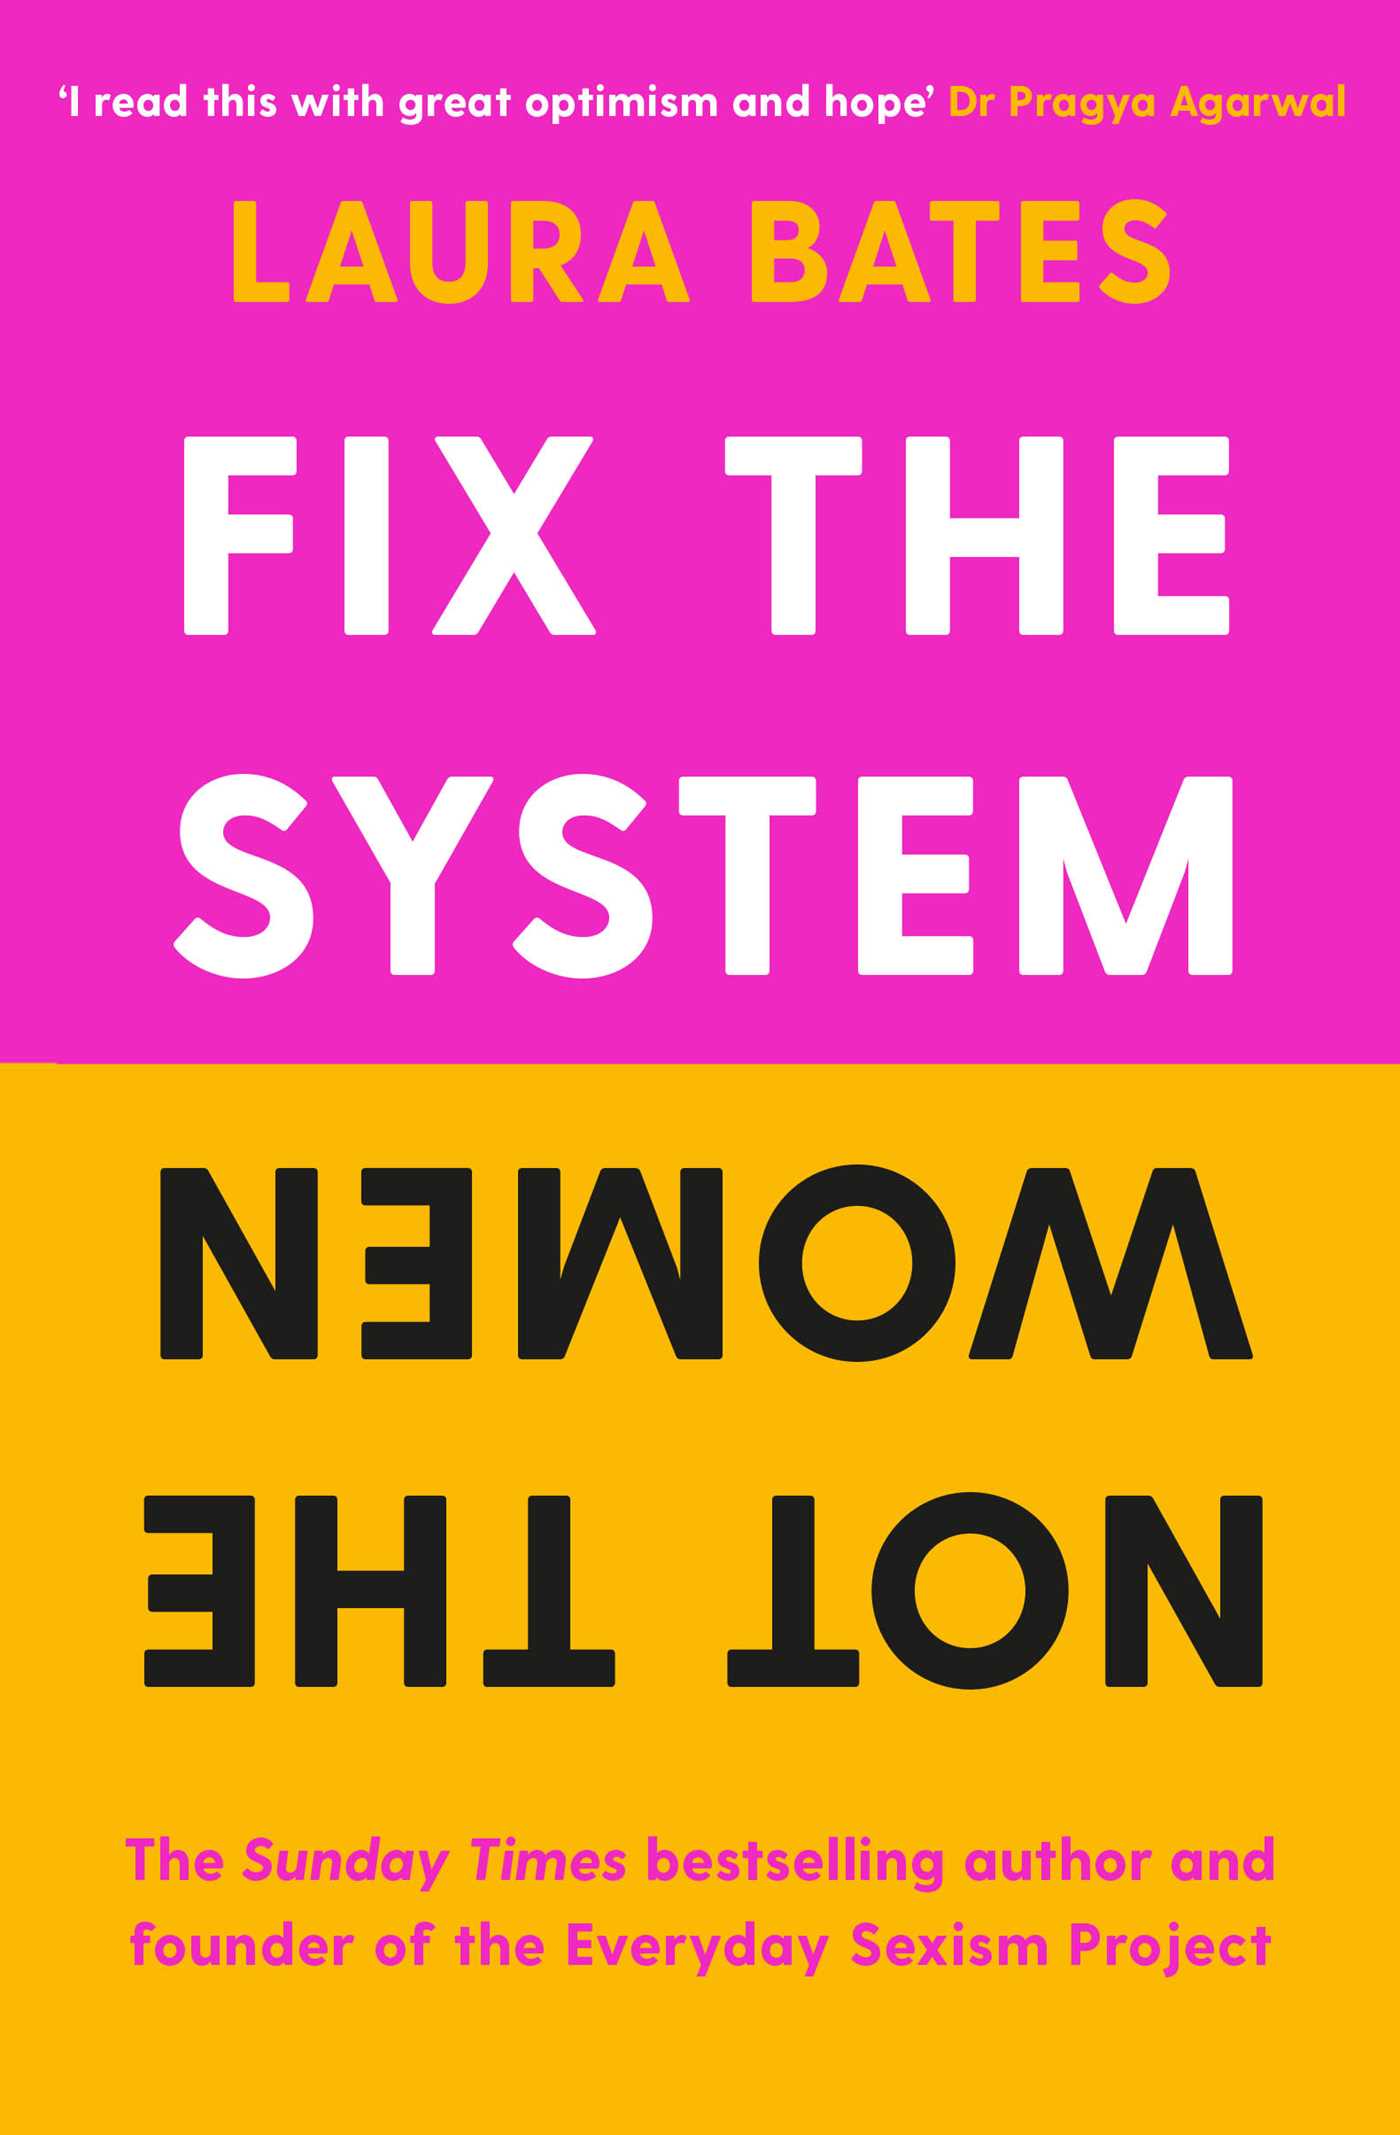 Fix the System, Not the Women book by Laura Bates